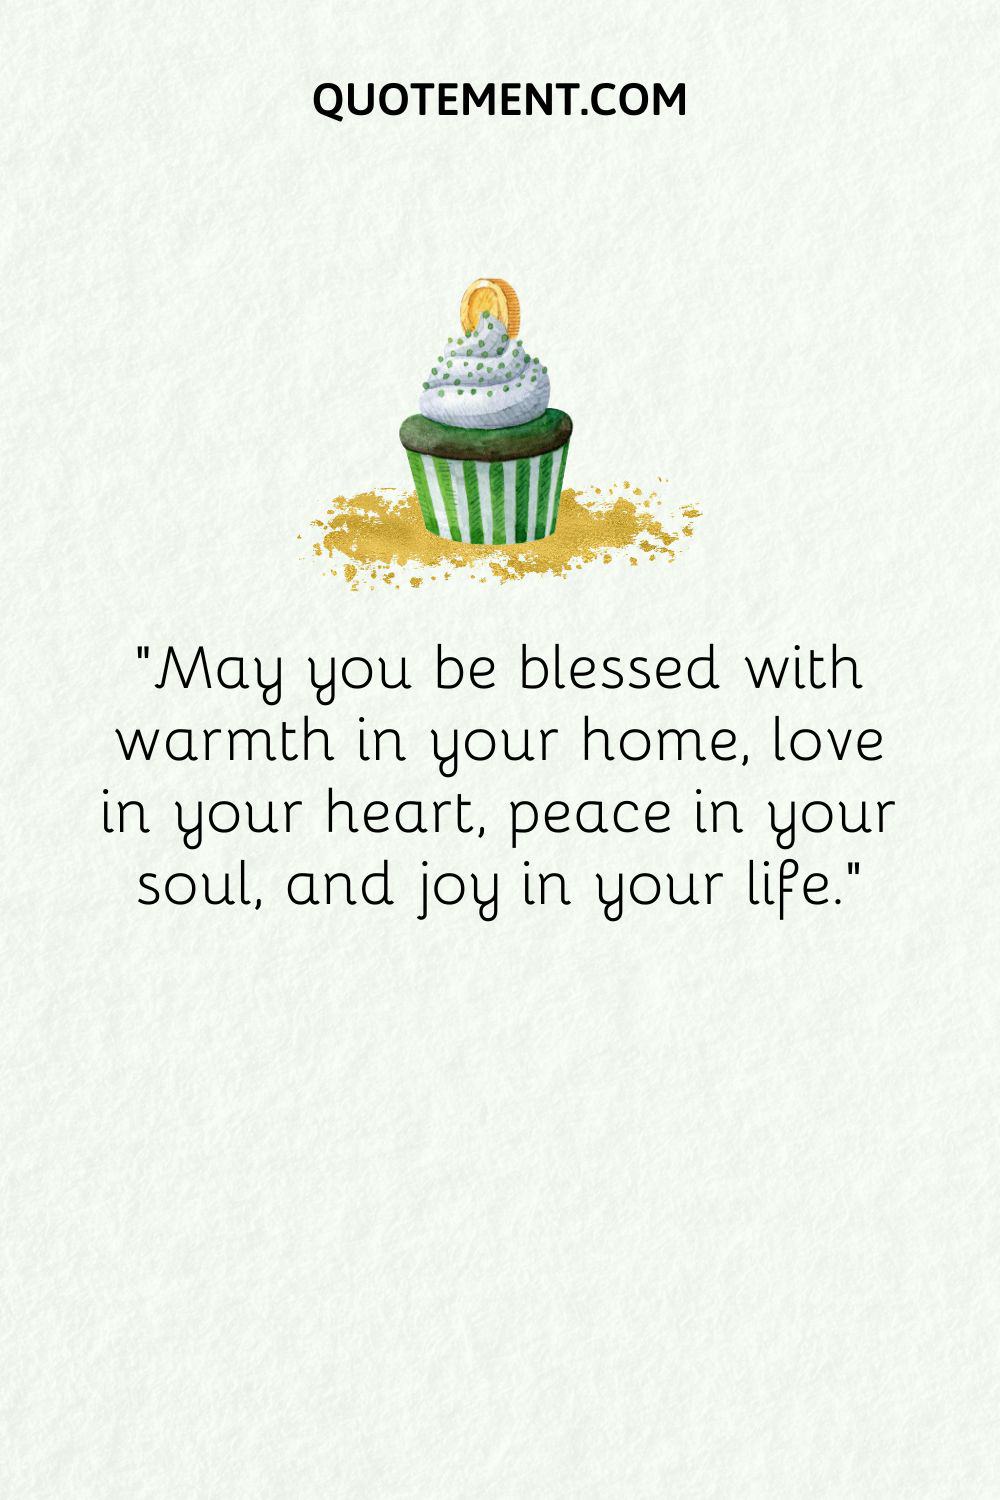 May you be blessed with warmth in your home, love in your heart, peace in your soul, and joy in your life